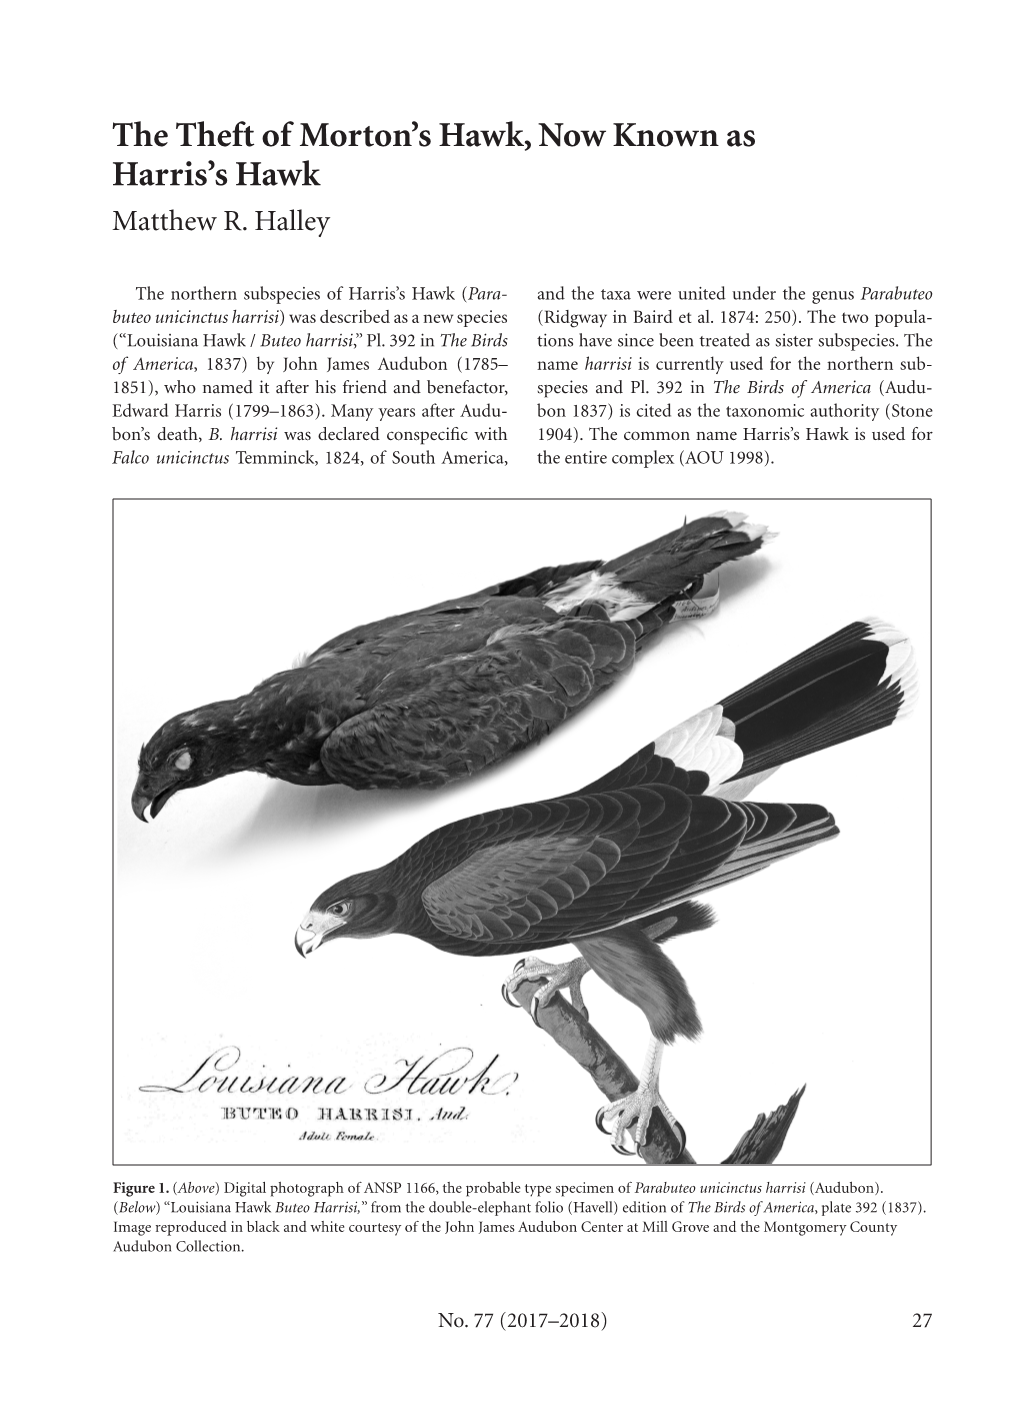 The Theft of Morton's Hawk, Now Known As Harris's Hawk